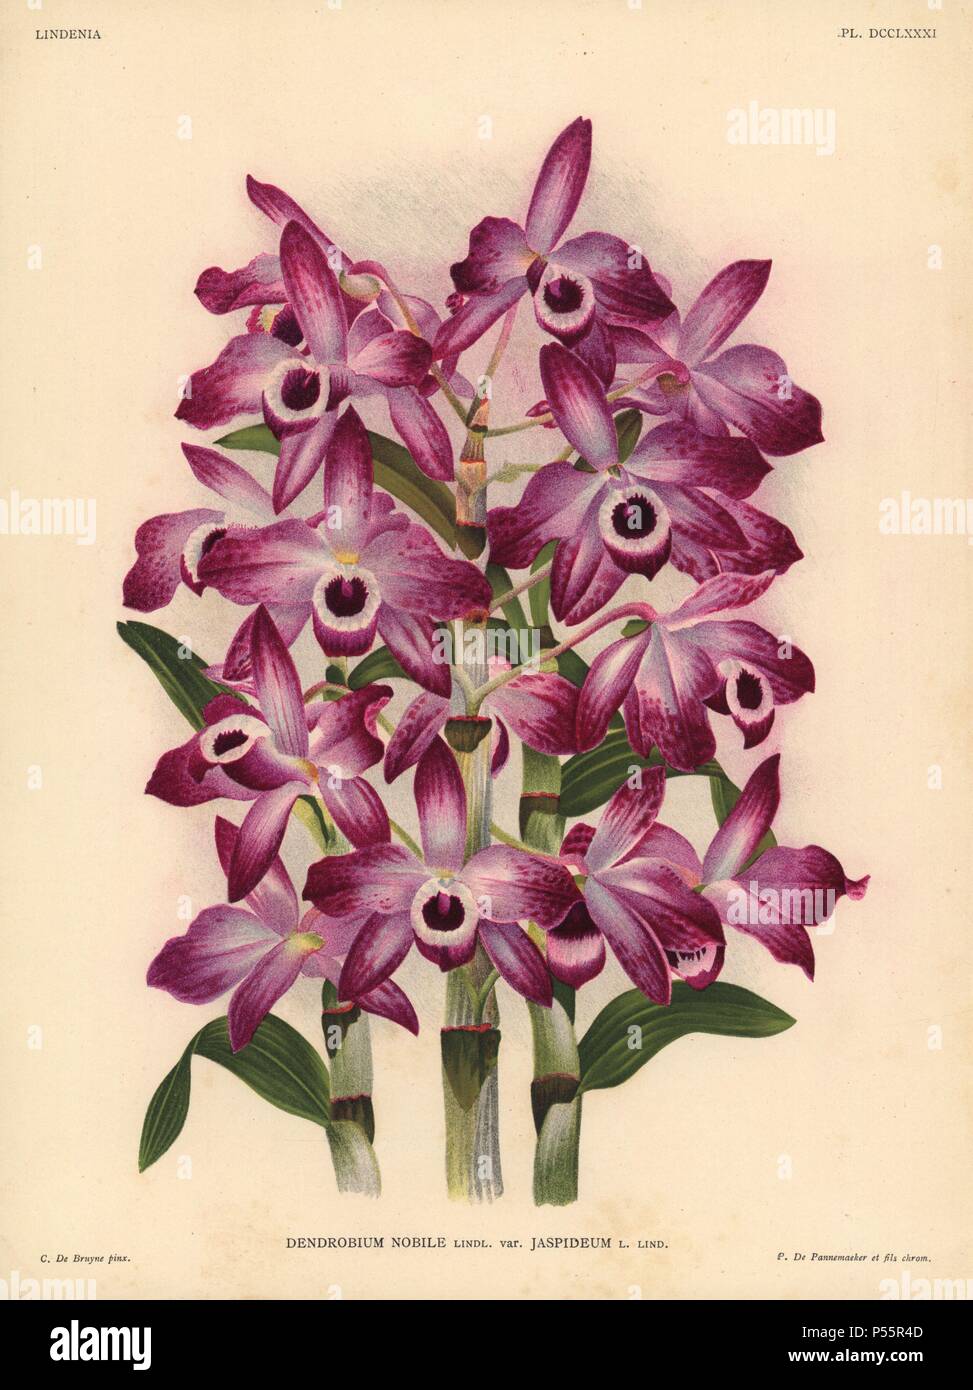 Jaspideum variety of Dendrobium nobile orchid. Illustration drawn by C. de Bruyne and chromolithographed by P. de Pannemaeker et fils from Lucien Linden's 'Lindenia, Iconographie des Orchidees,' Brussels, 1902. Stock Photo